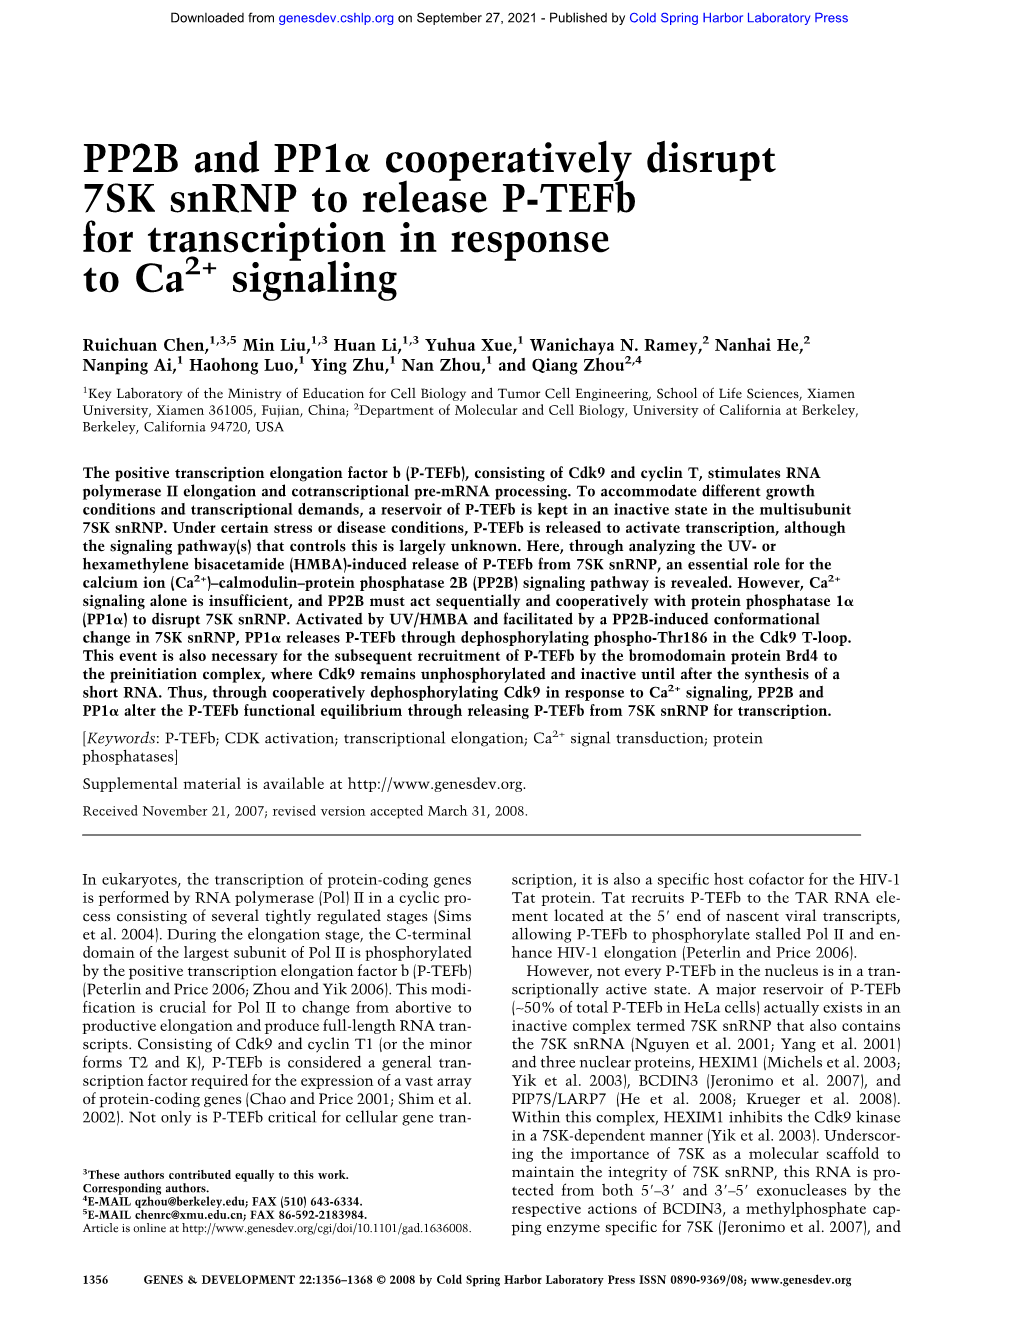 PP2B and PP1 Cooperatively Disrupt 7SK Snrnp to Release P-Tefb for Transcription in Response to Ca Signaling